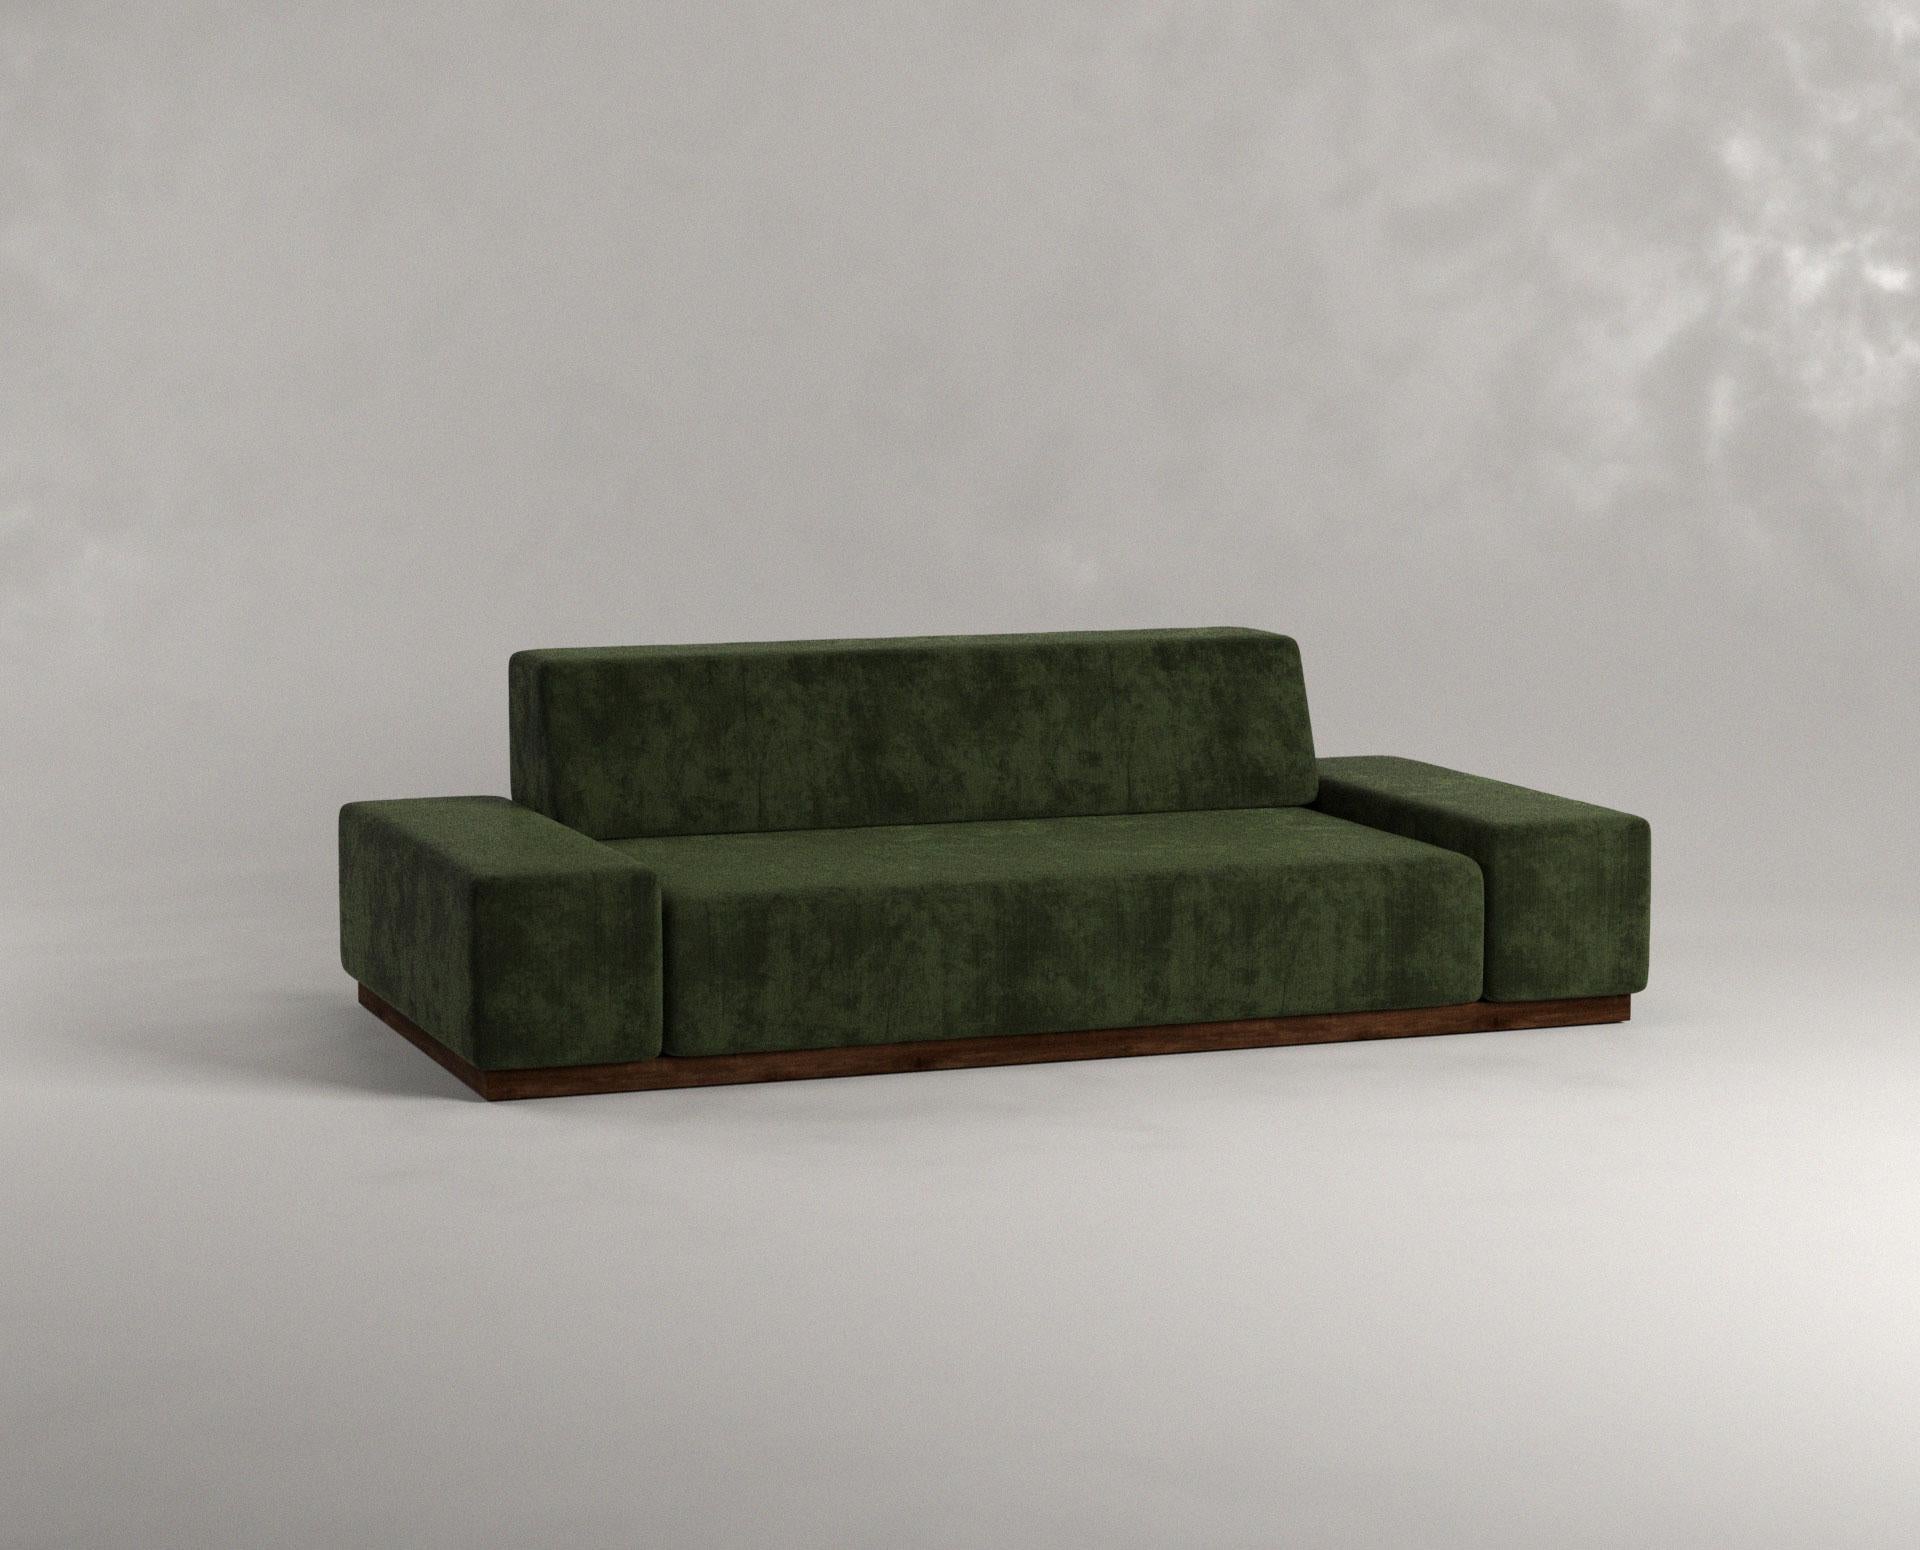 Olive Two Seater Nube Sofa by Siete Studio
Dimensions: D200 x W100 x H60 cm.
Materials: Walnut, cushions, upholstery.

Characterised by its round edges and soft white cushions, Nube carries the comforting sensation of falling into a cloud.
The